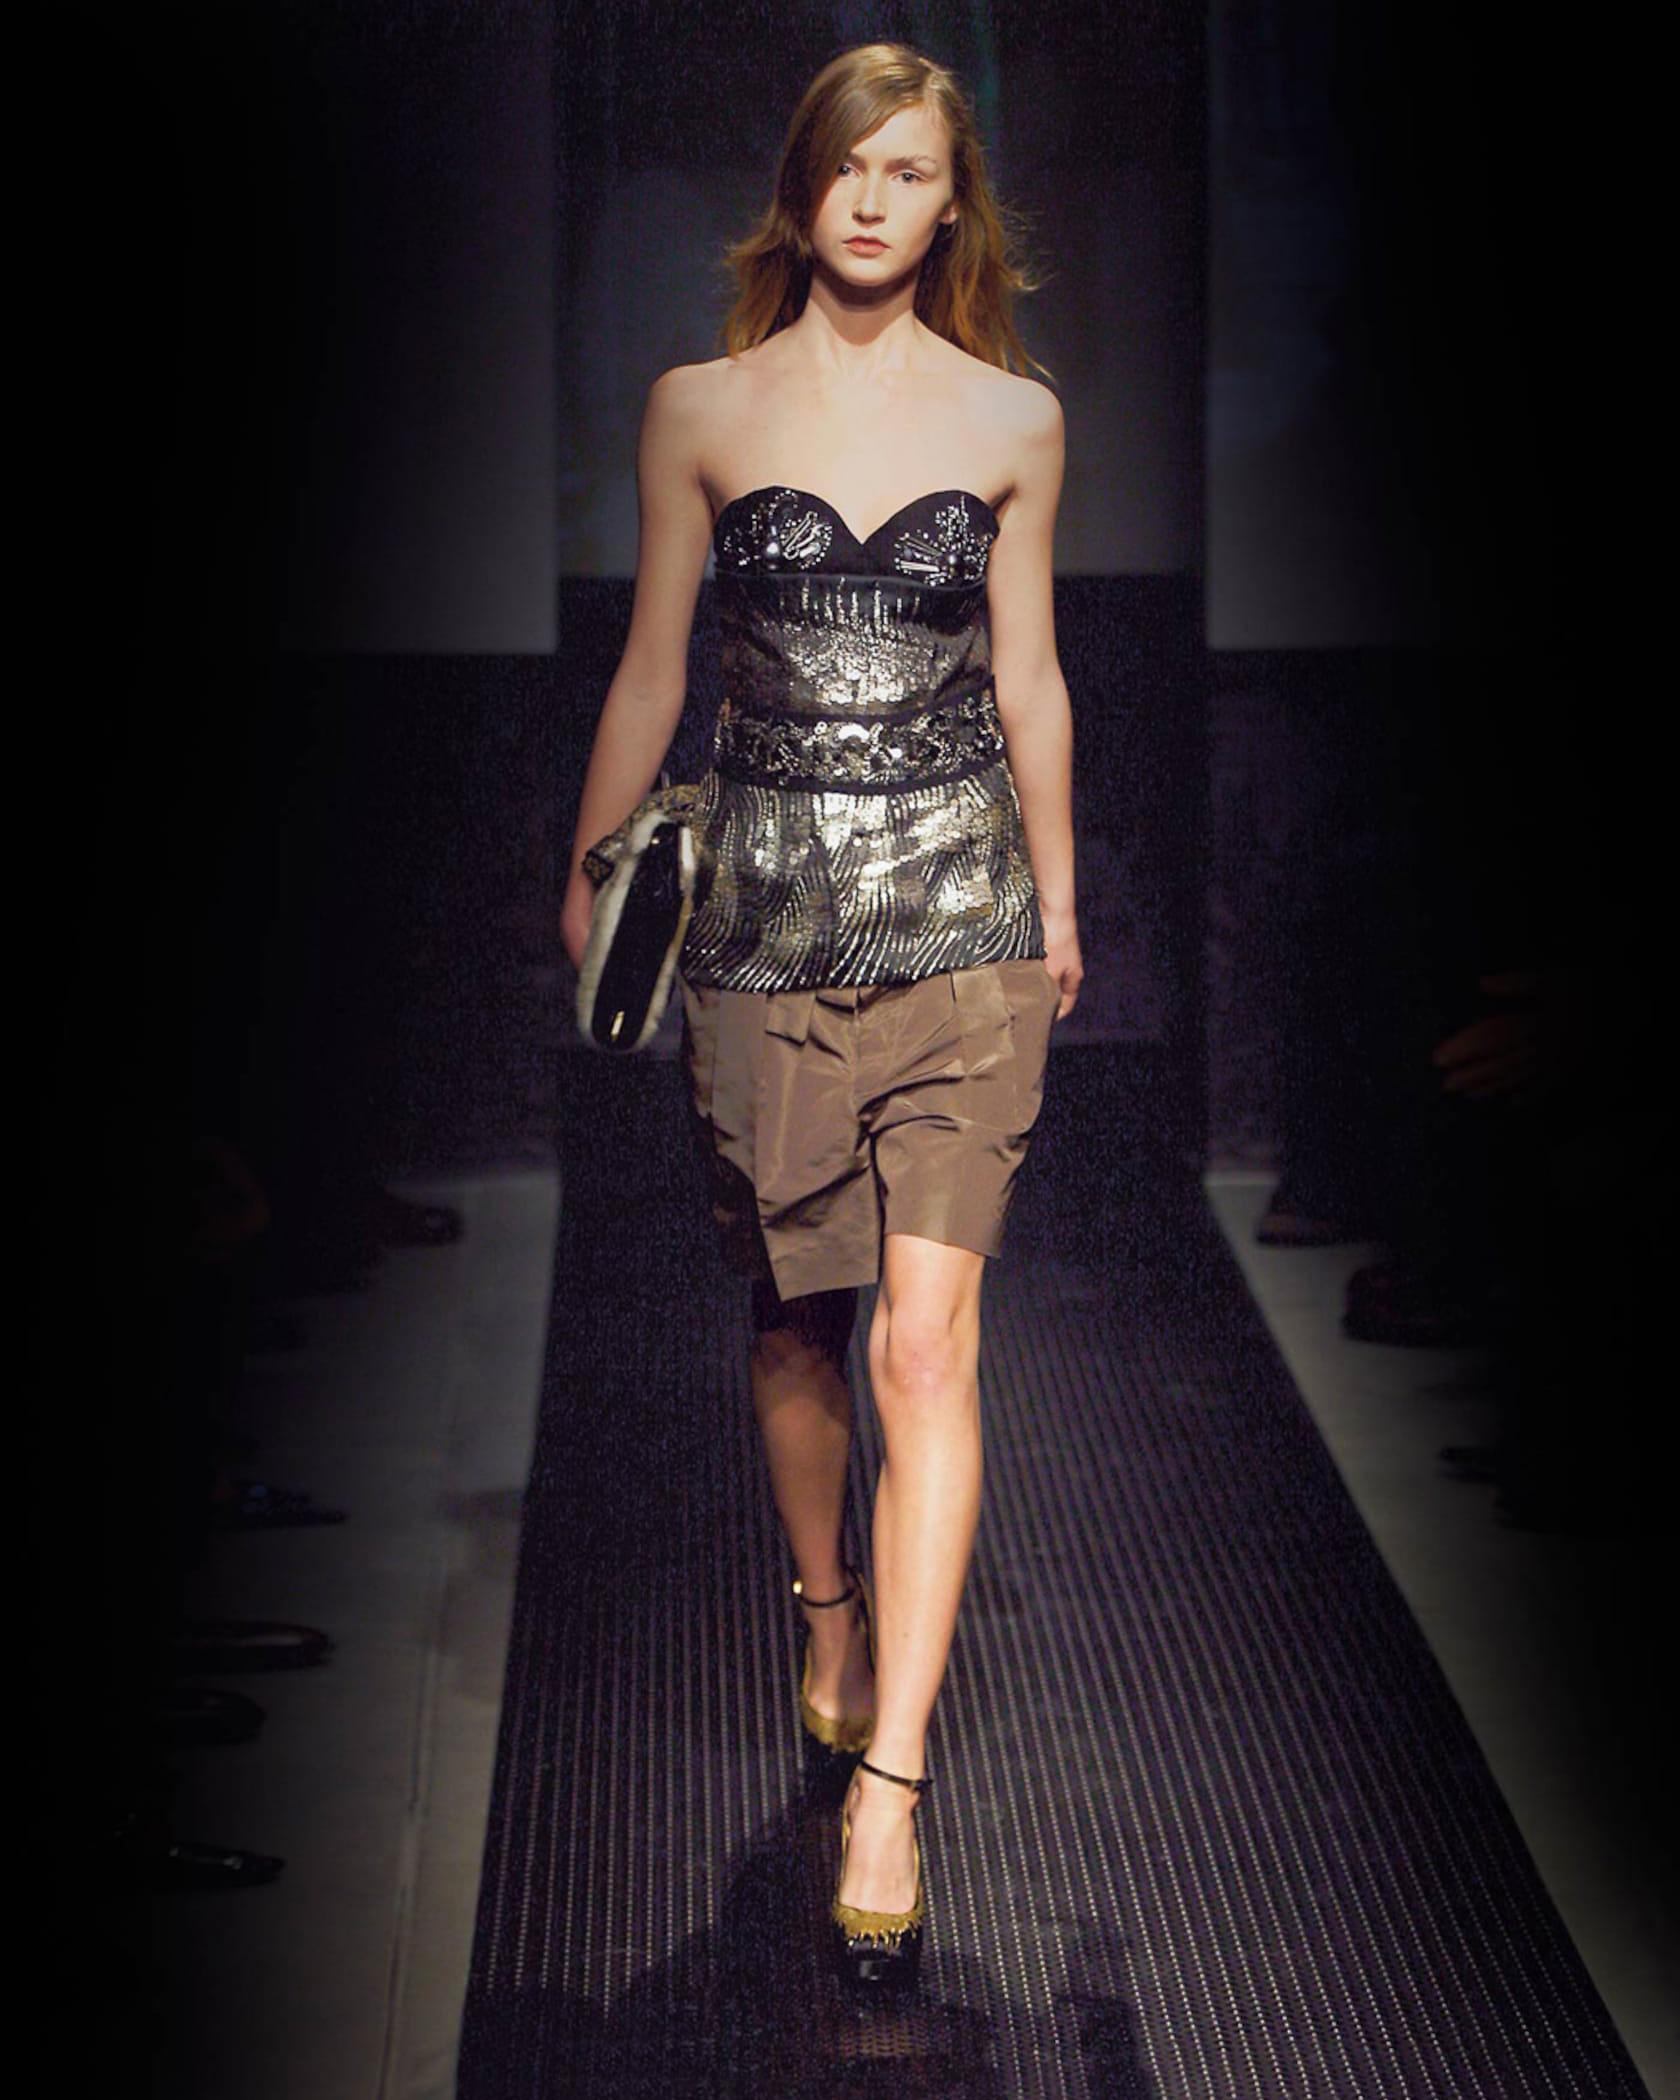 A/W 2006 Prada by Miuccia Prada black bustier with silver embellishments throughout. Upper composed of black felt fabric, and lower composed of semi-sheer mesh. Silver paillette and 'gear' inspired embellishments and 3D circular details at bust.